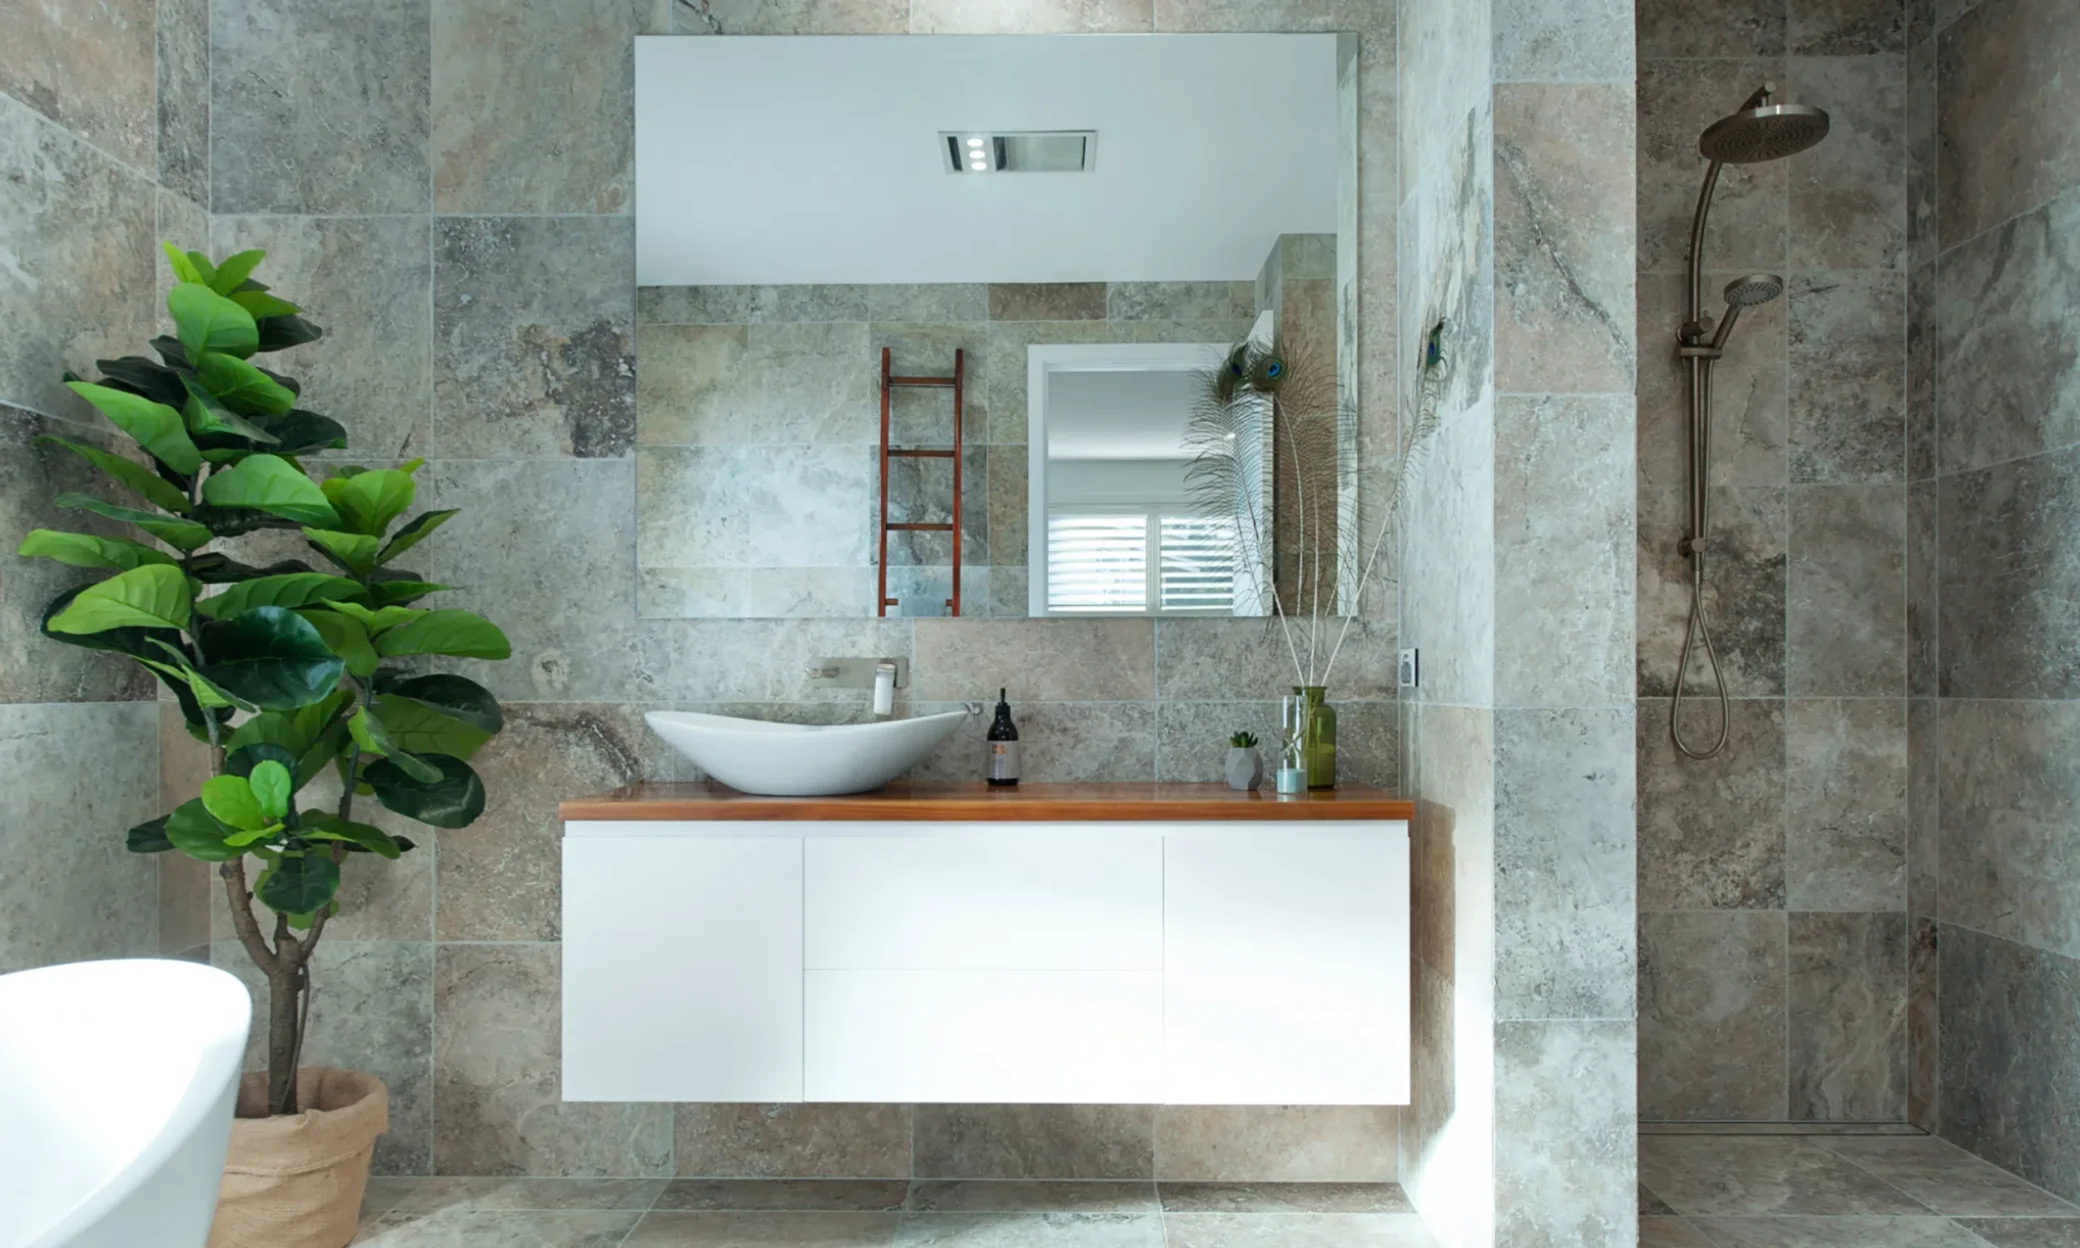 Modern bathroom with stone tile walls and floor, featuring a custom built white floating vanity with a vessel sink, a ladder towel rack, a large mirror, and a green potted plant next to a walk